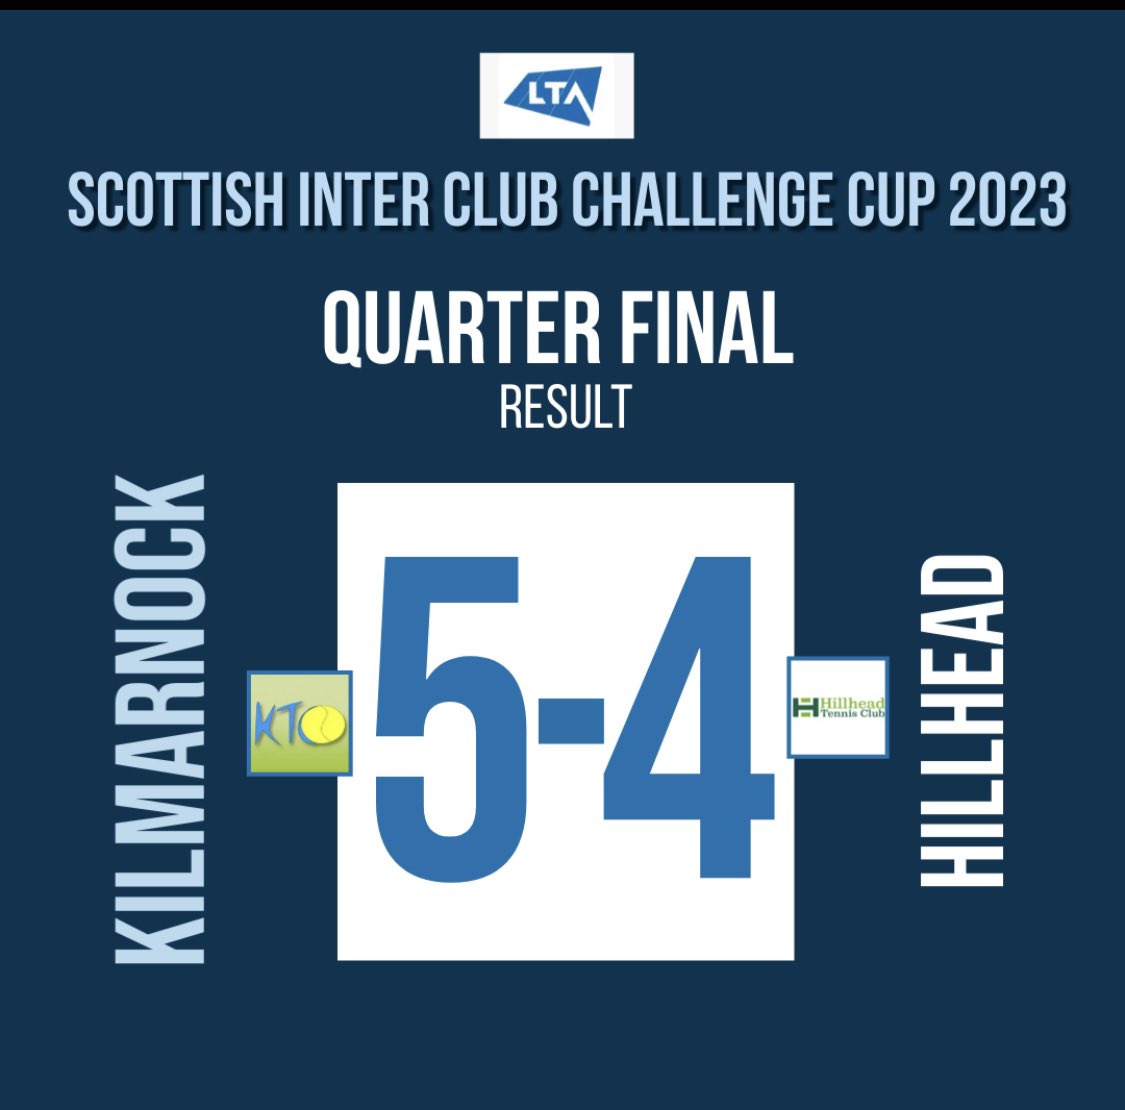 Fantastic result for our Men 1st Team @Kilmarnock_TC securing a 5-4 win agonist a strong @HillheadTennis team in the Scottish Inter Club Challenge Cup Quarter Finals. Bring on the semis! Congratulations to the team!  @tennisscotland  🎾💪🏼👏🏼